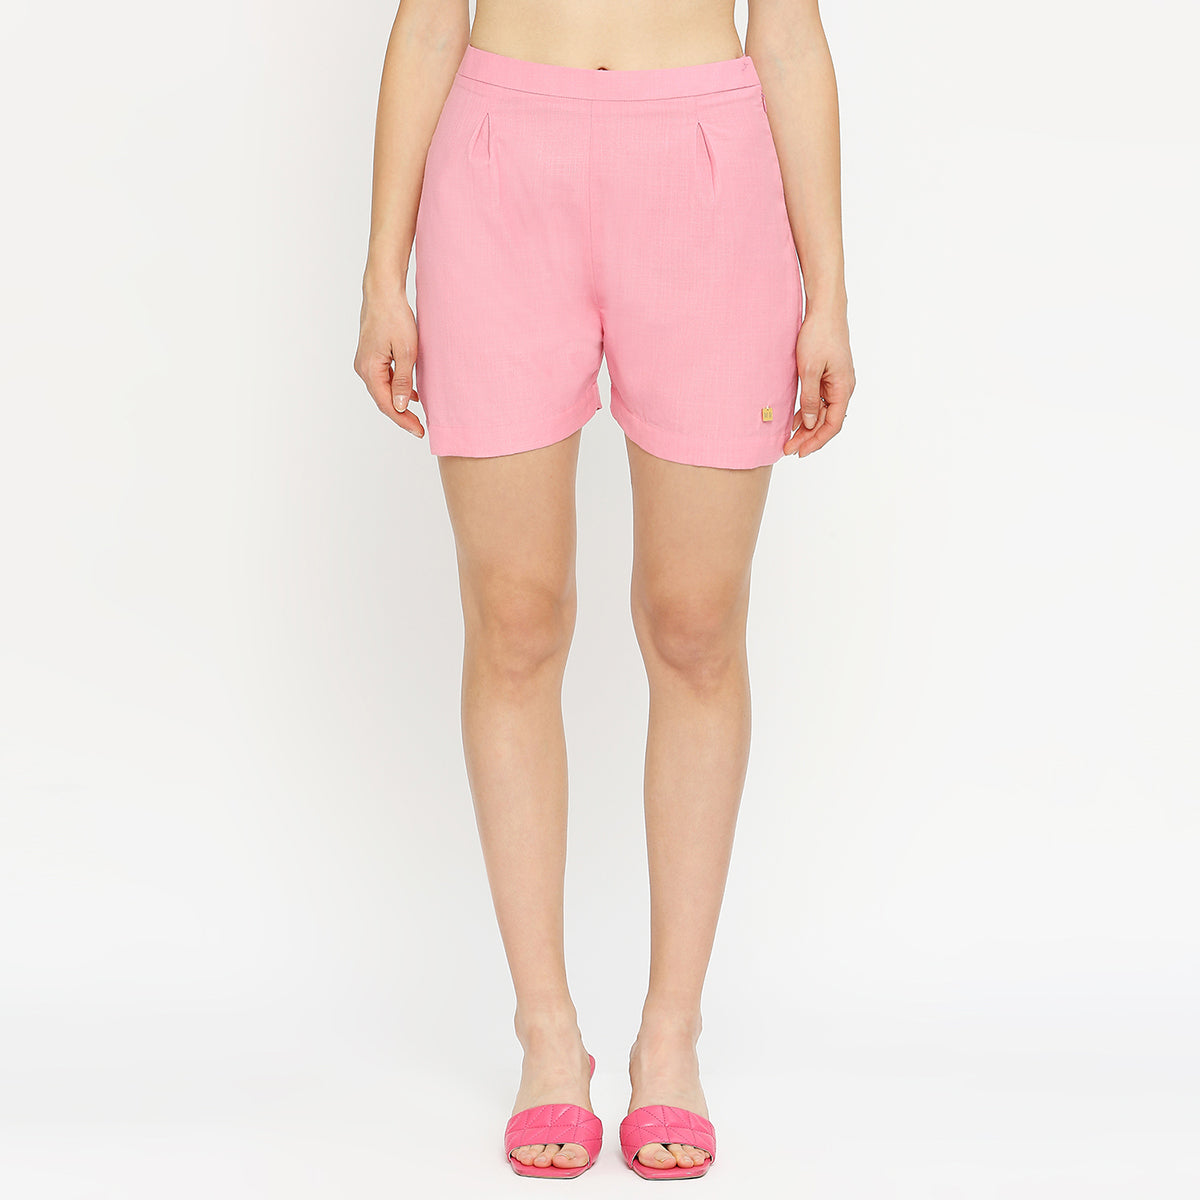 PINK COTTON TOP WITH SHORTS